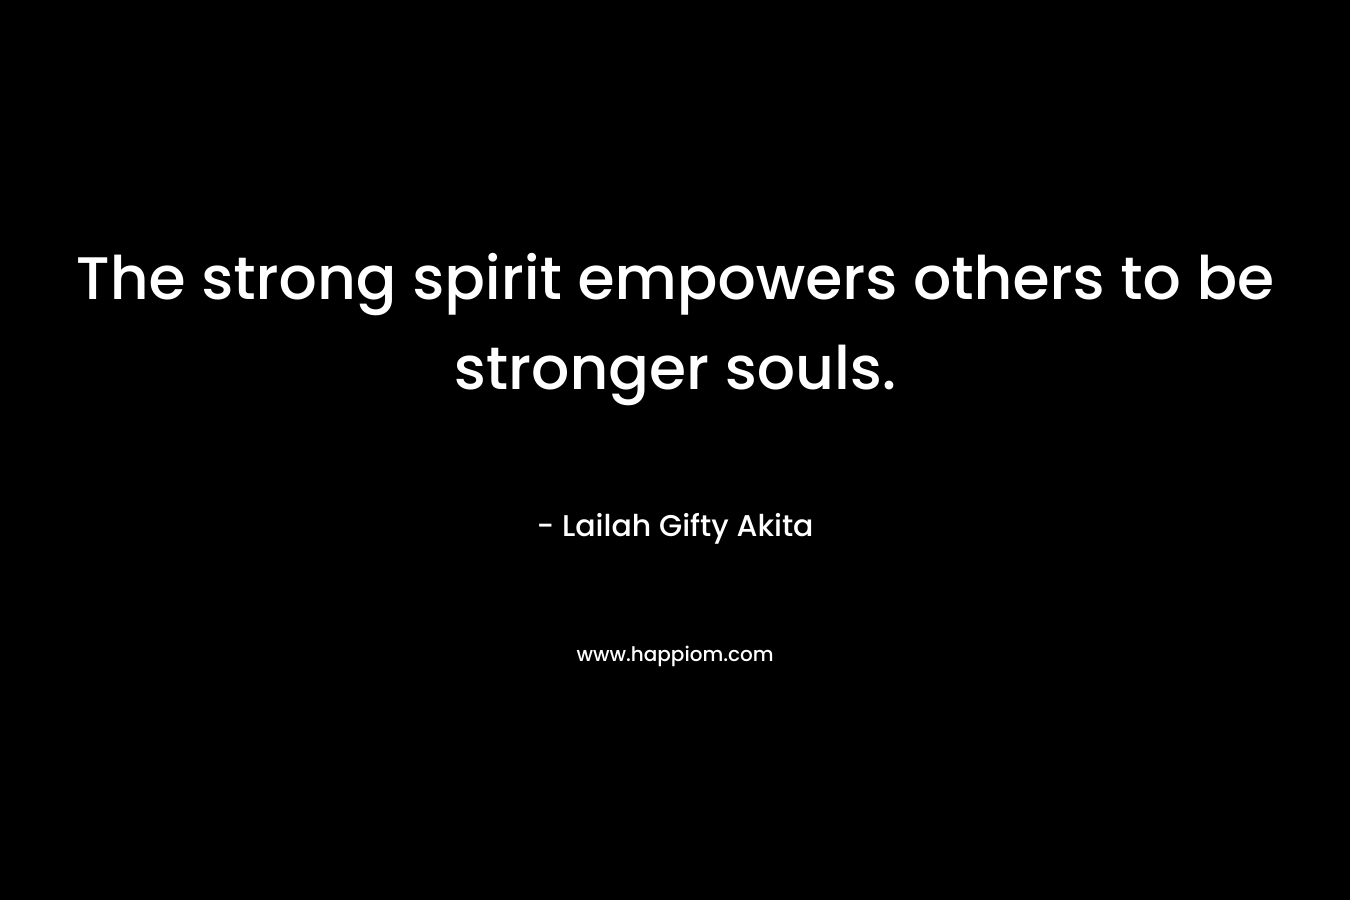 The strong spirit empowers others to be stronger souls. – Lailah Gifty Akita